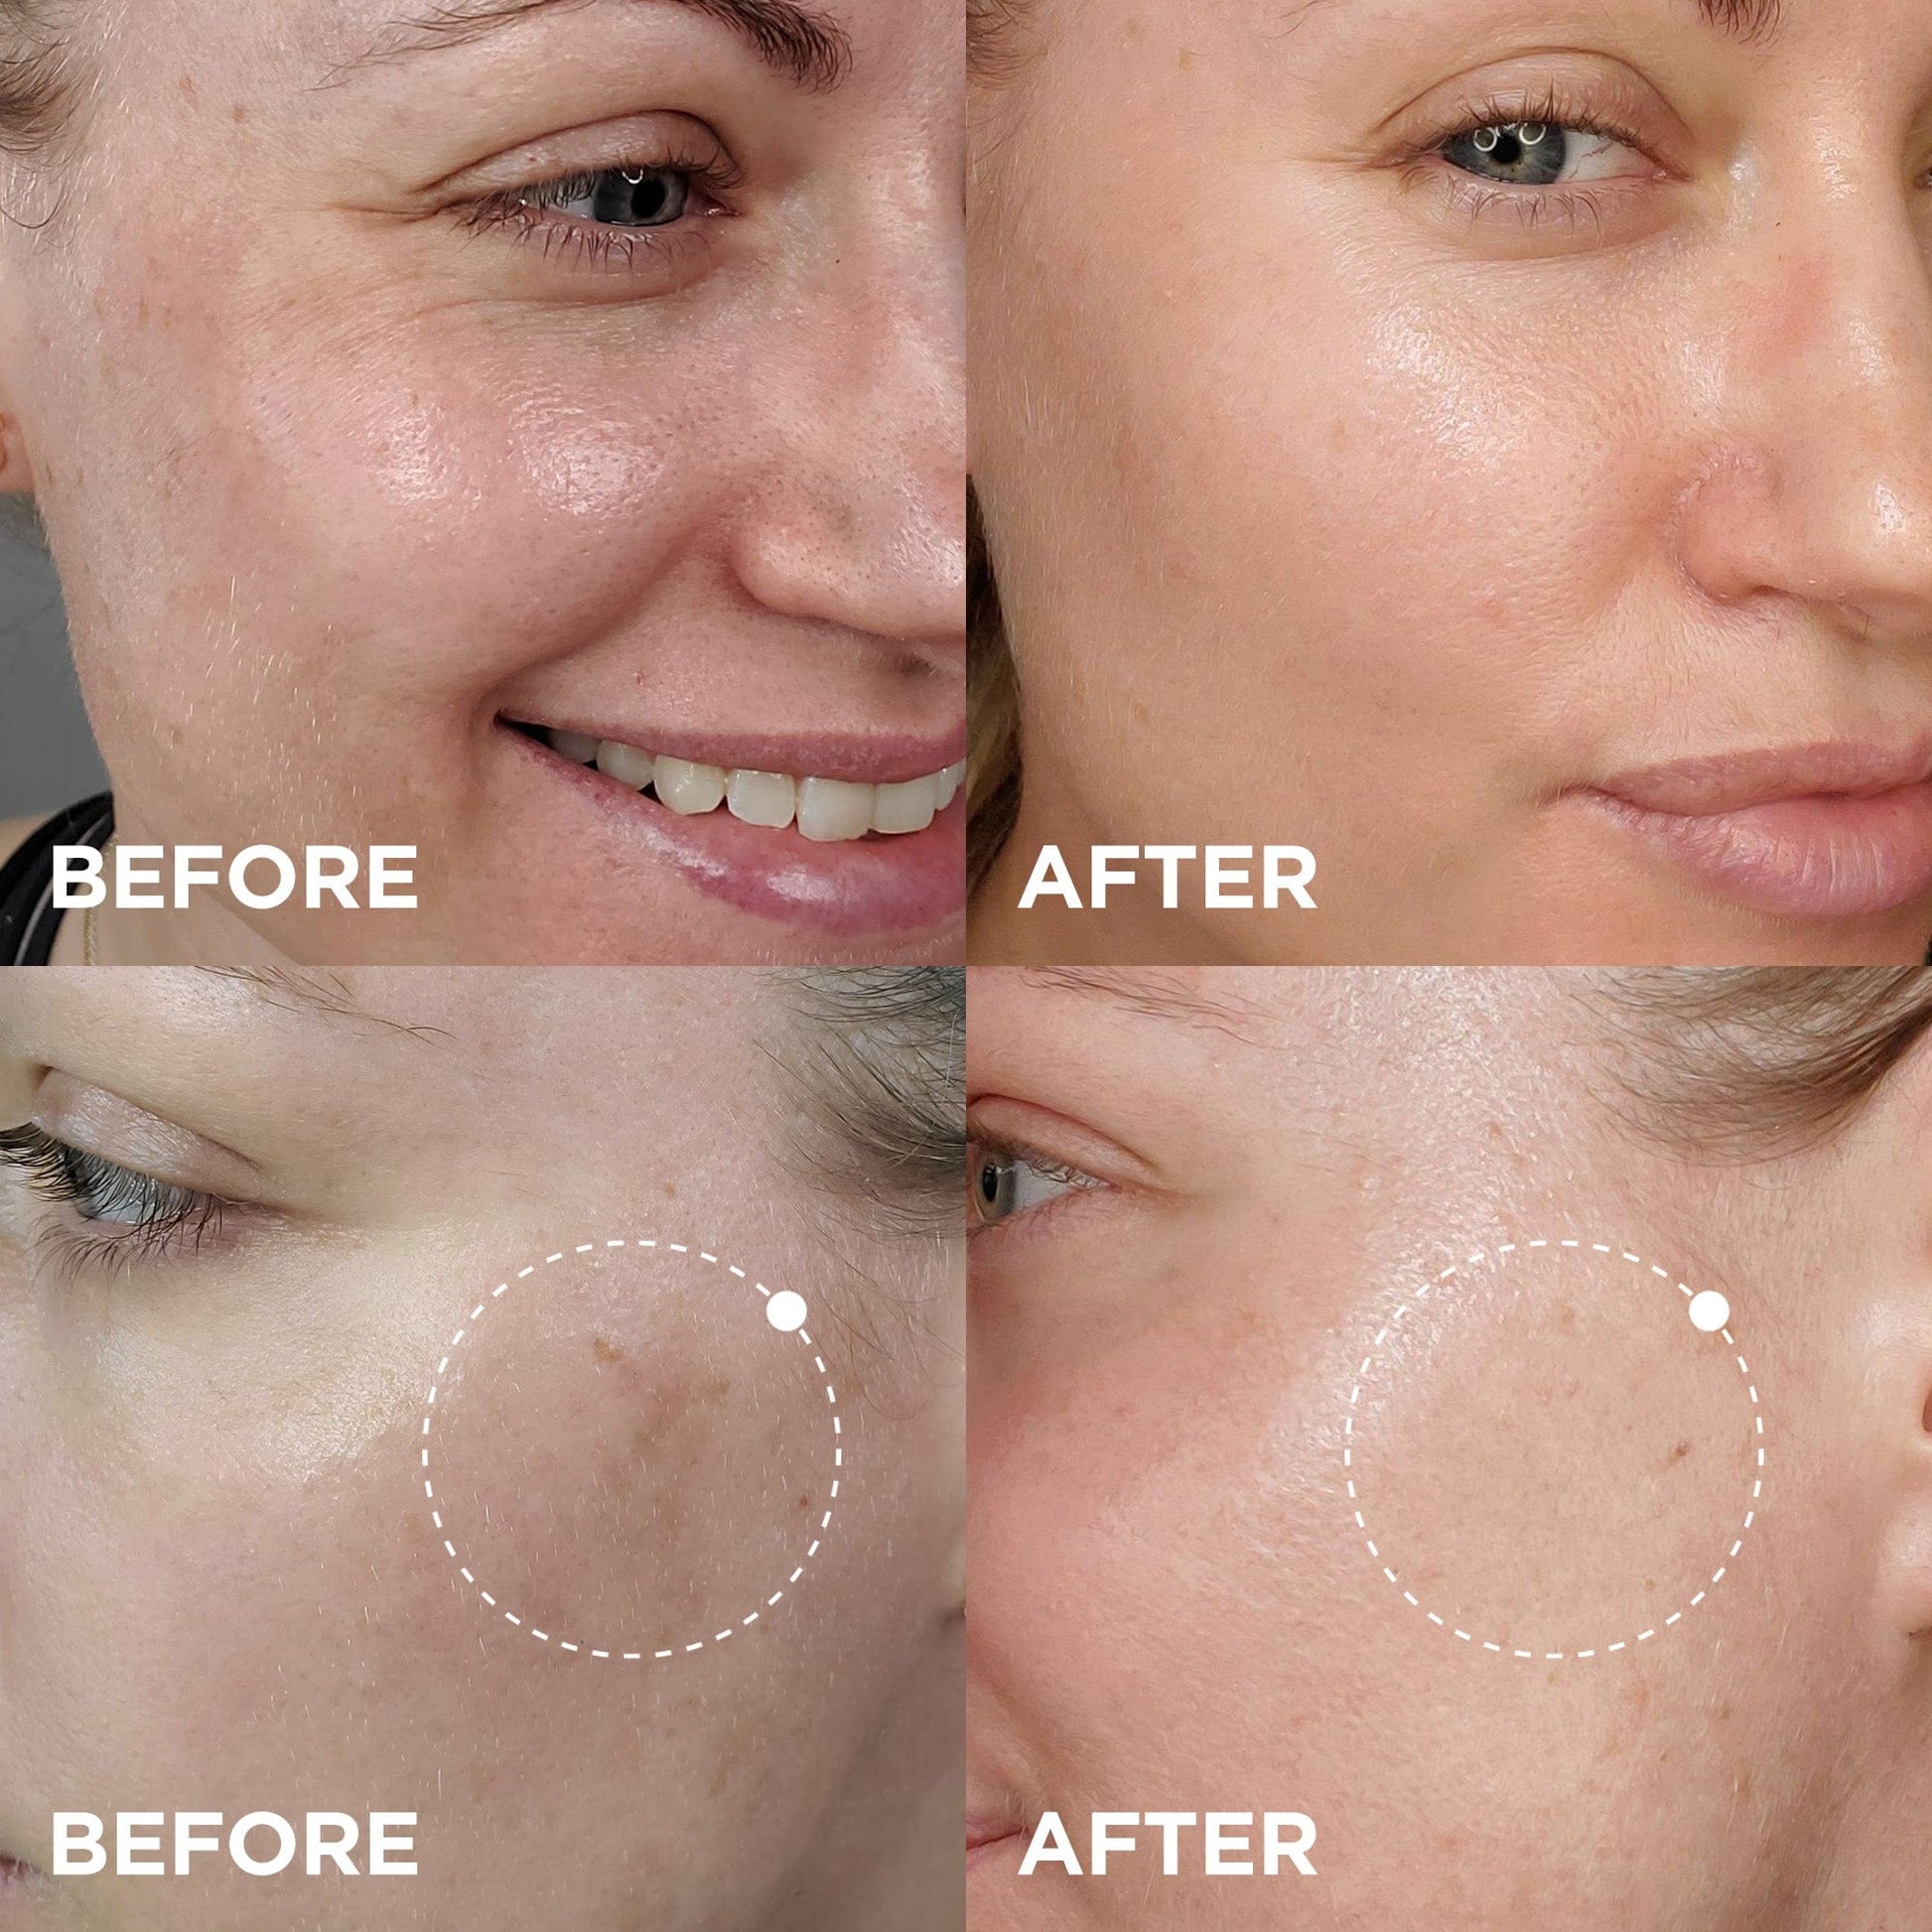 Quadrant of images showing a woman's face and close-up of skin under the eye, labeled 'BEFORE' and 'AFTER' treatment, highlighting reduced wrinkles and smoother skin texture